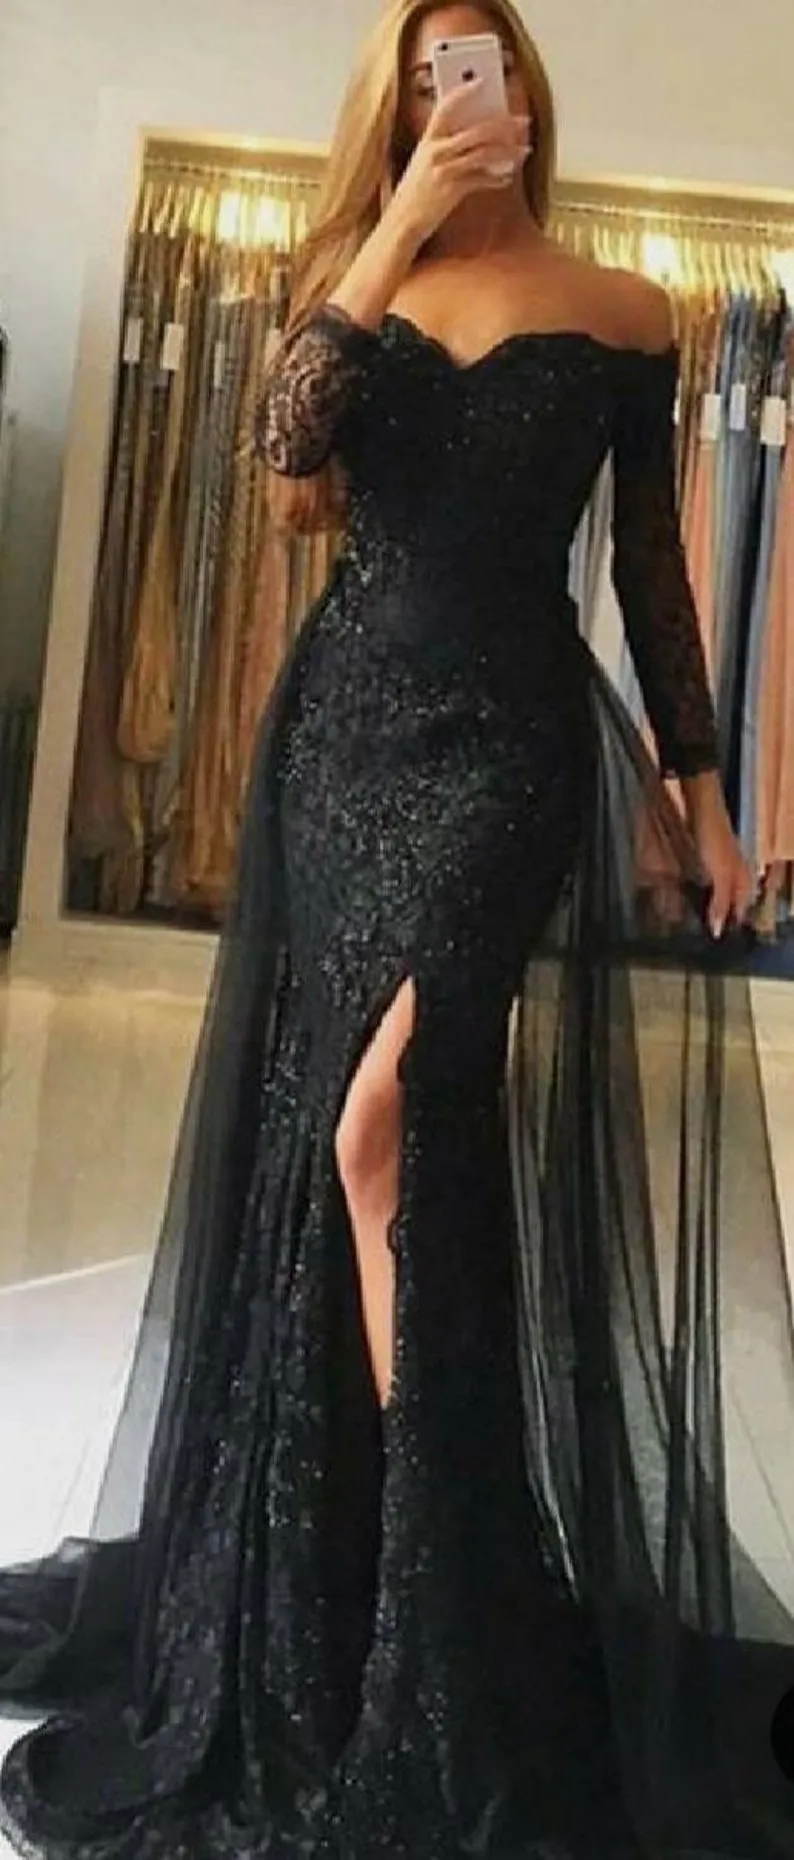 2022 Black Beading Bead Prom Gowns Off-Shoulder Sheath Lace Split Sexy Plus Size Formal Evening Dress With Tulle Long Train